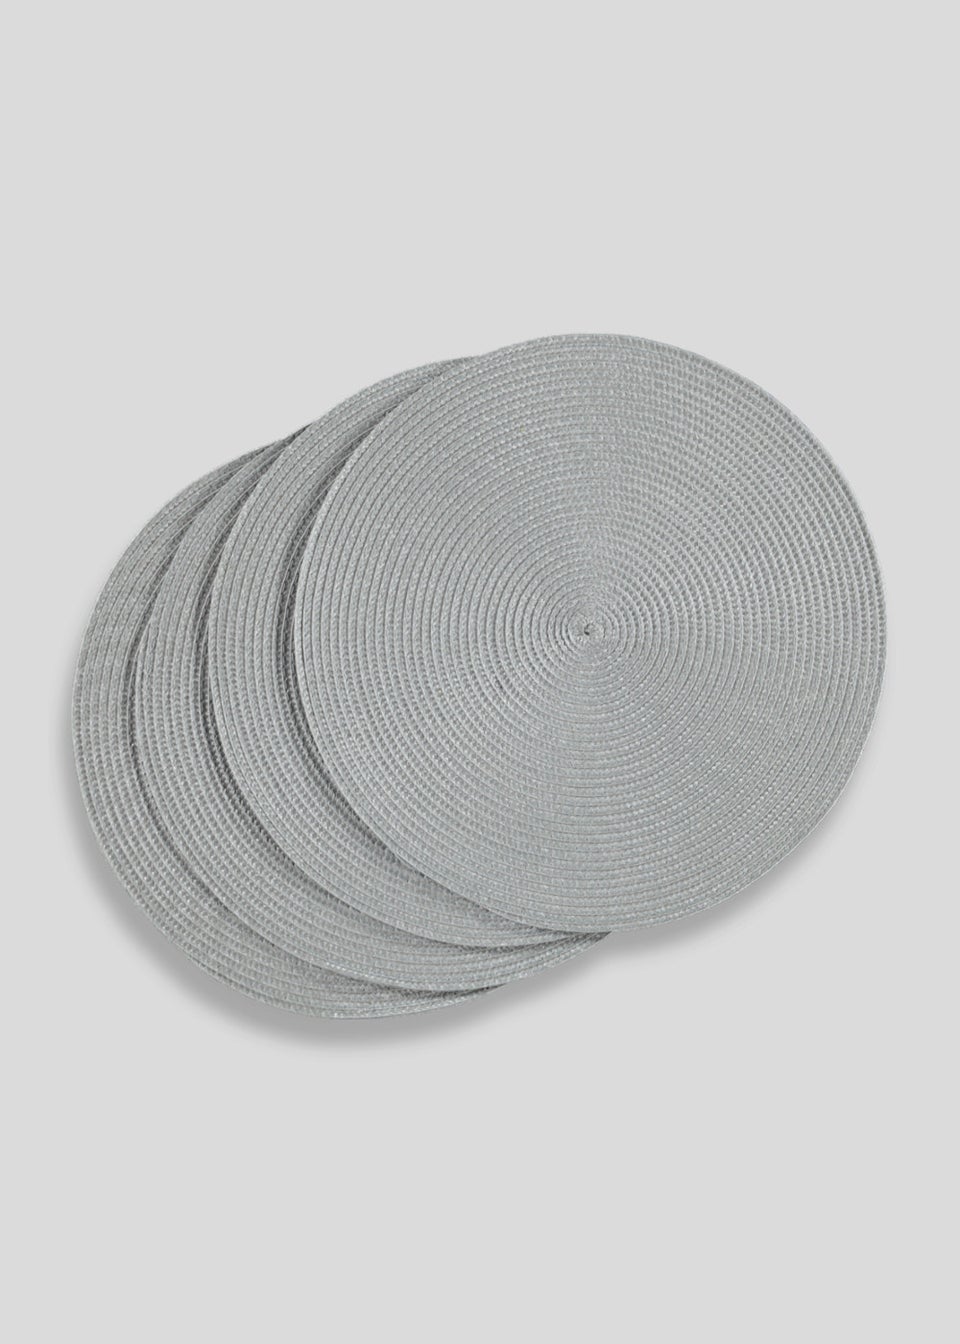 4 Pack Grey Woven Placemats (33cm)